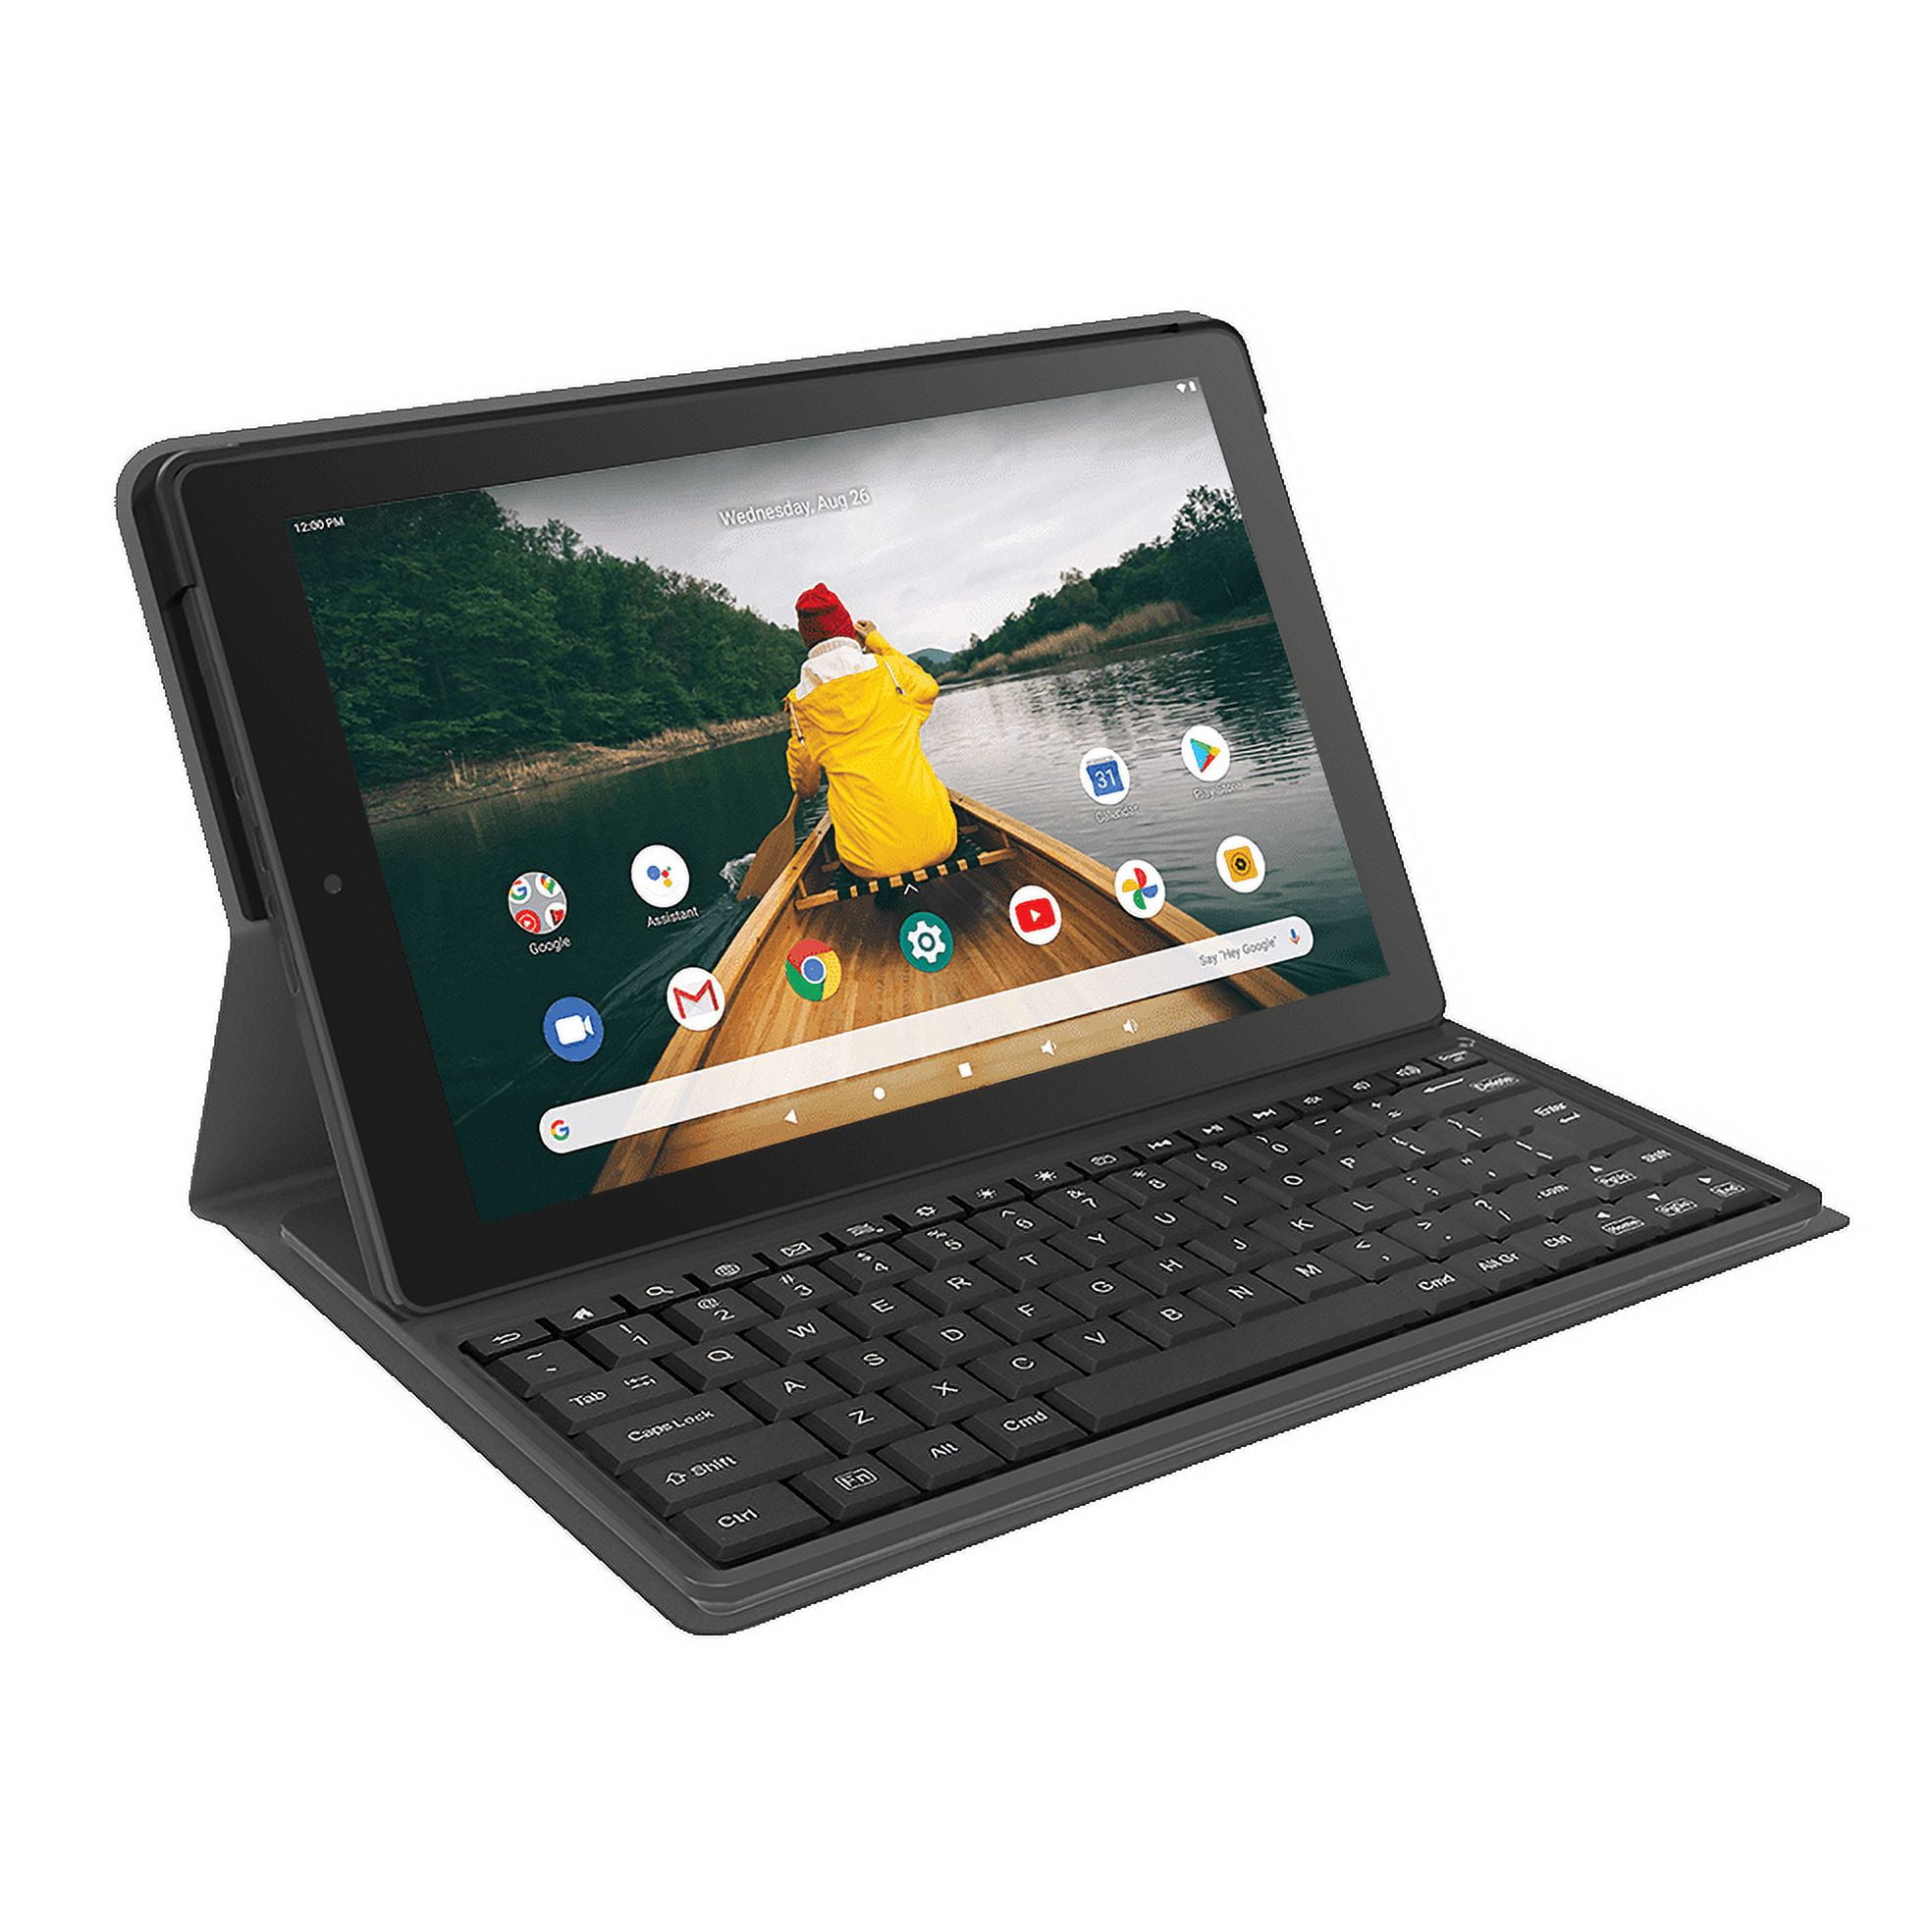 RCA 10 Viking Pro II Android Tablet/2-in-1 with Folio Keyboard, 2GB RAM,  32GB Storage, Dual Cameras, Google Play